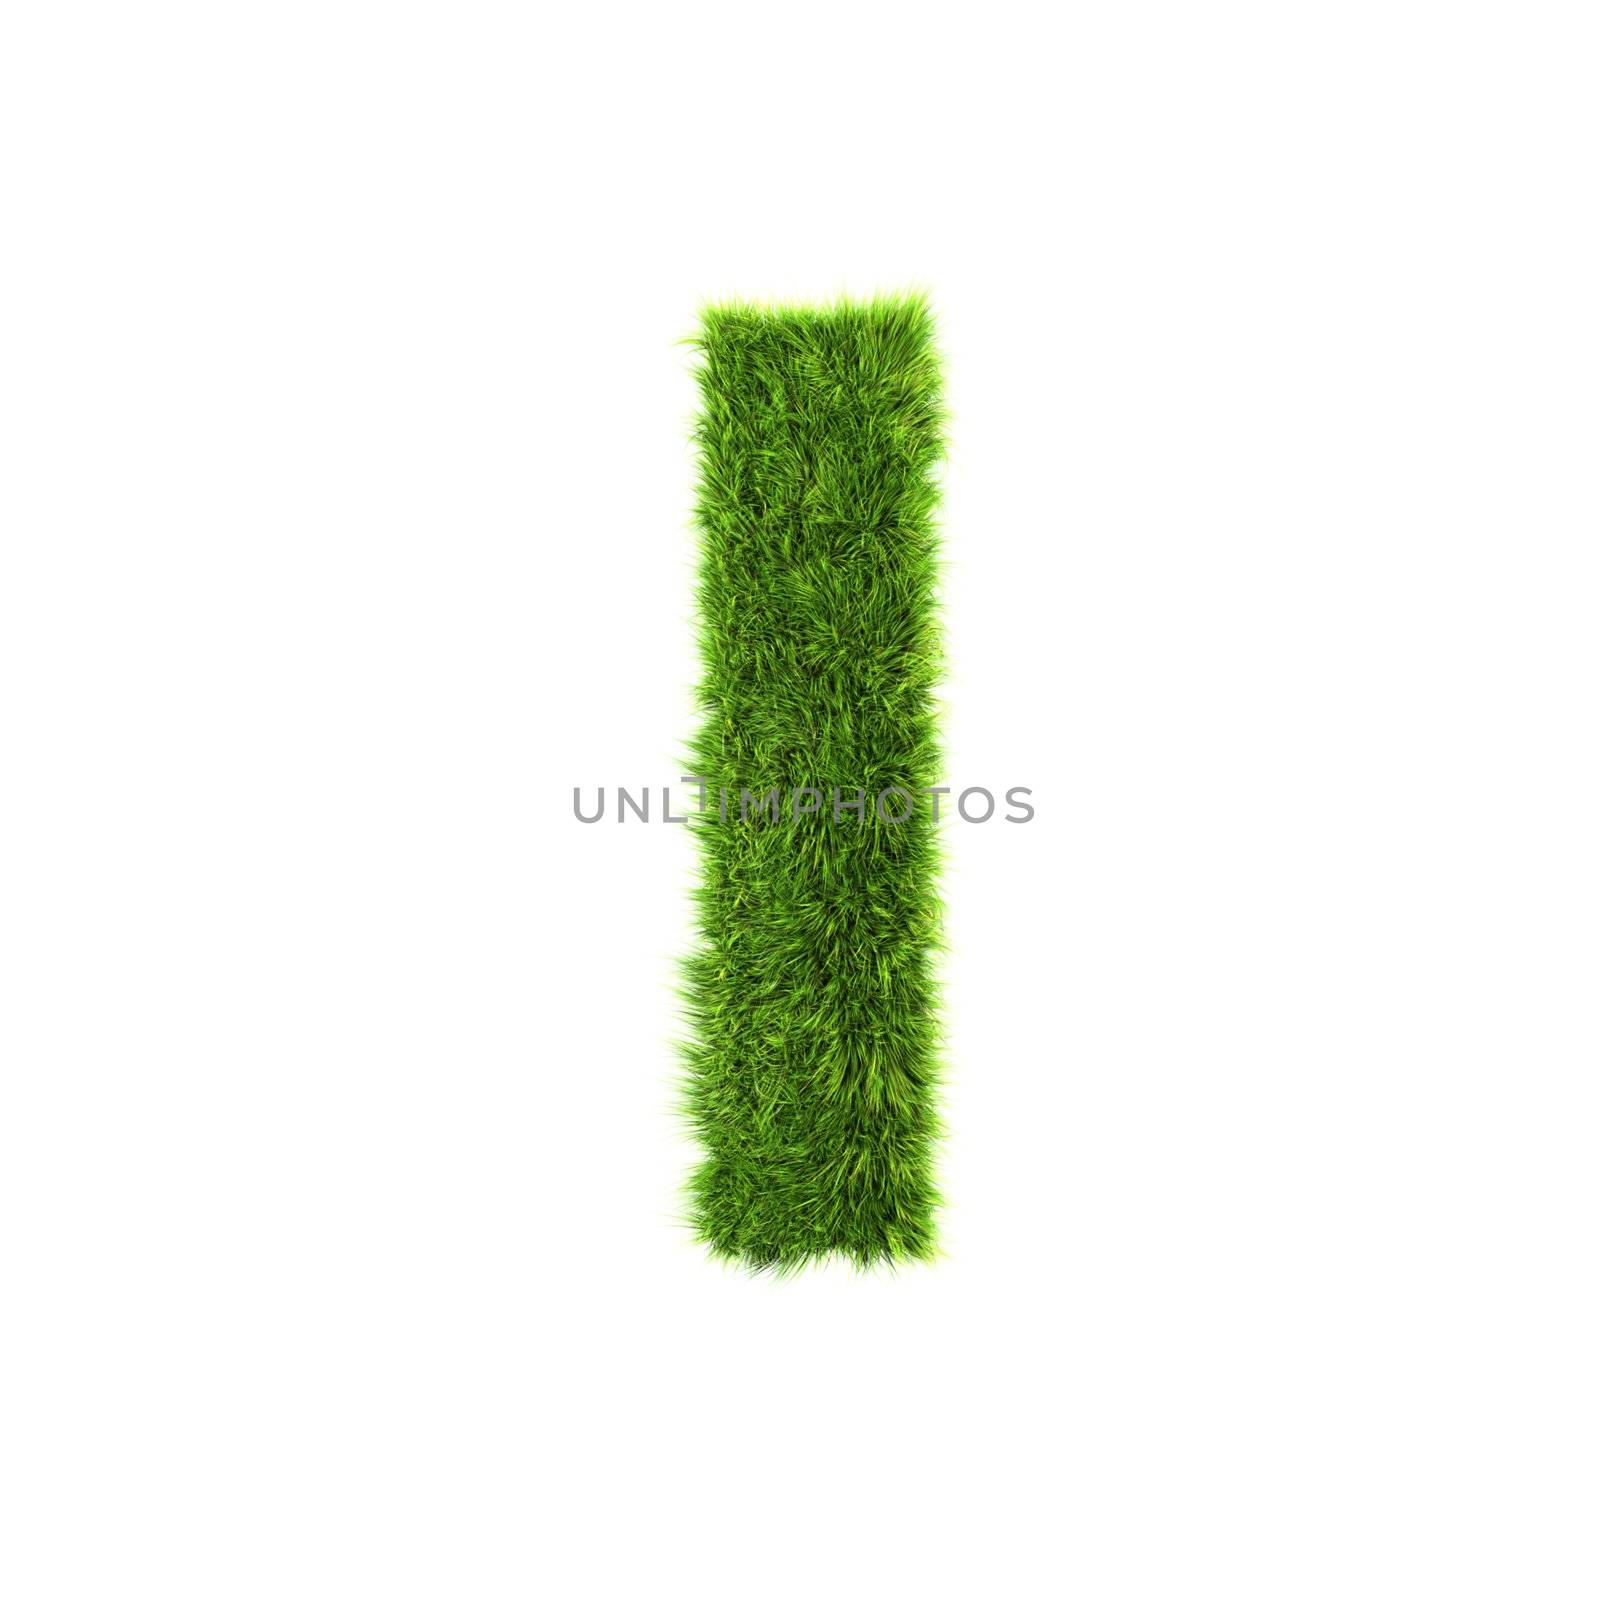 3d grass letter isolated on white background - I by chrisroll